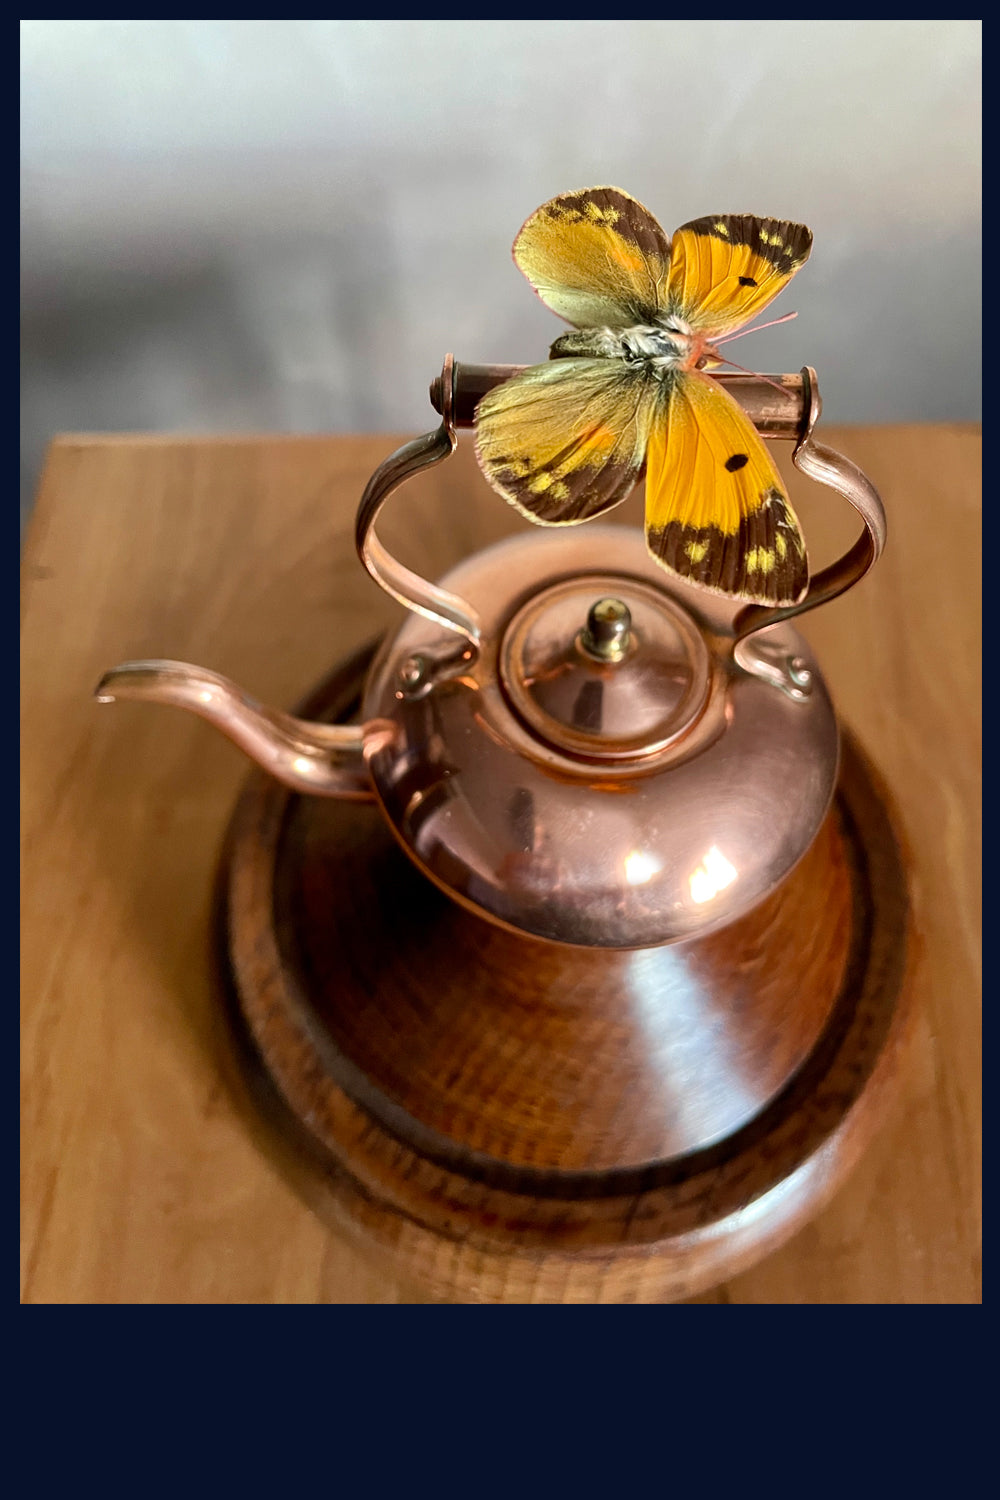 SOLD Enigma Variations Collection: Tiny Antique Copper Kettle with a Real Butterfly in a Glass Display Dome